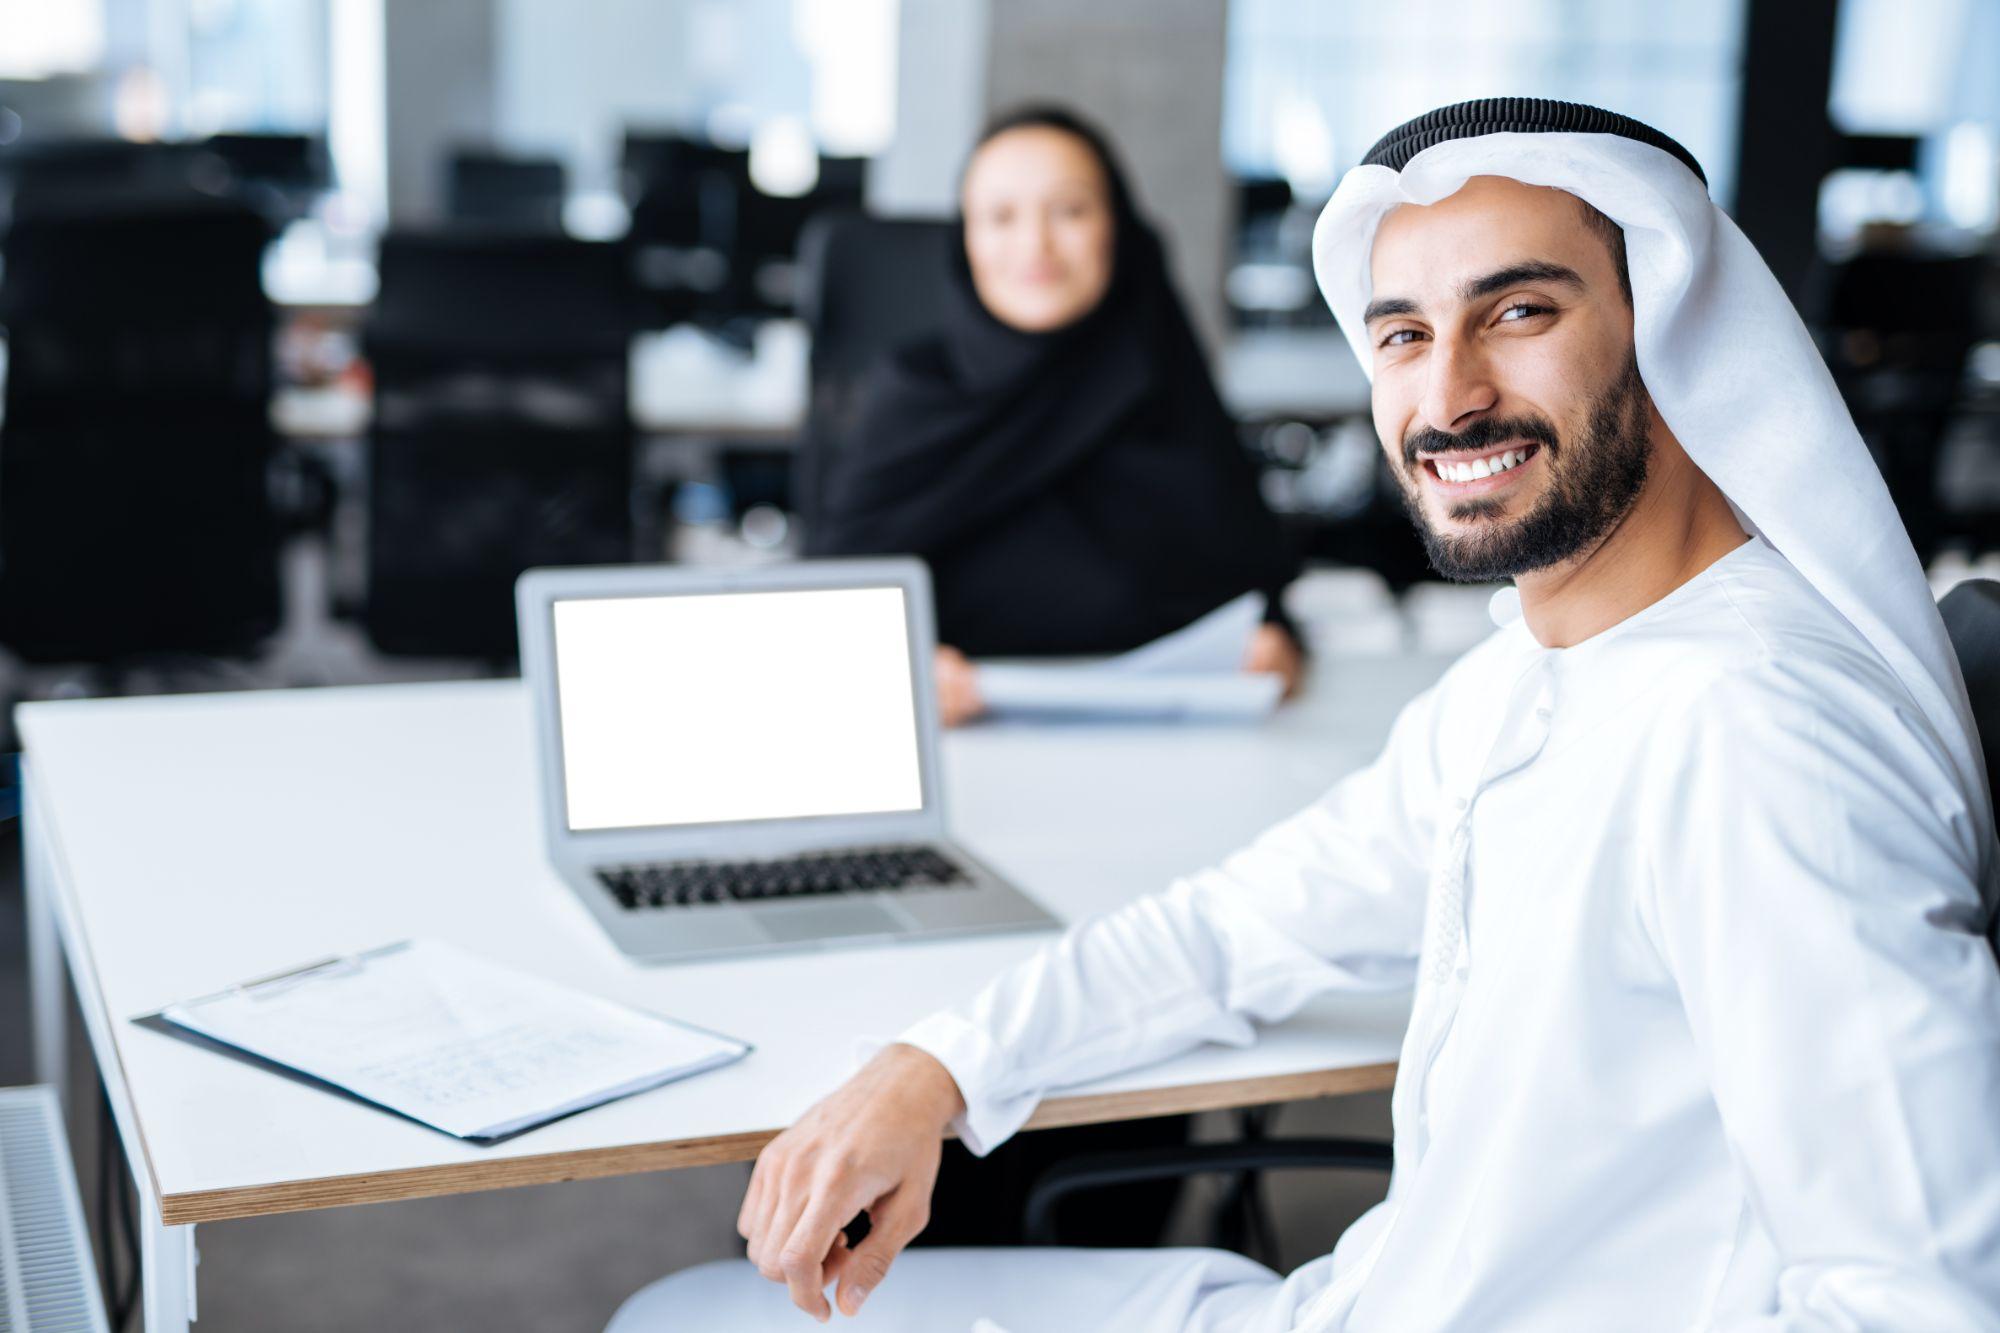 A complete guide on registering your tenancy contract with Ejari in Dubai